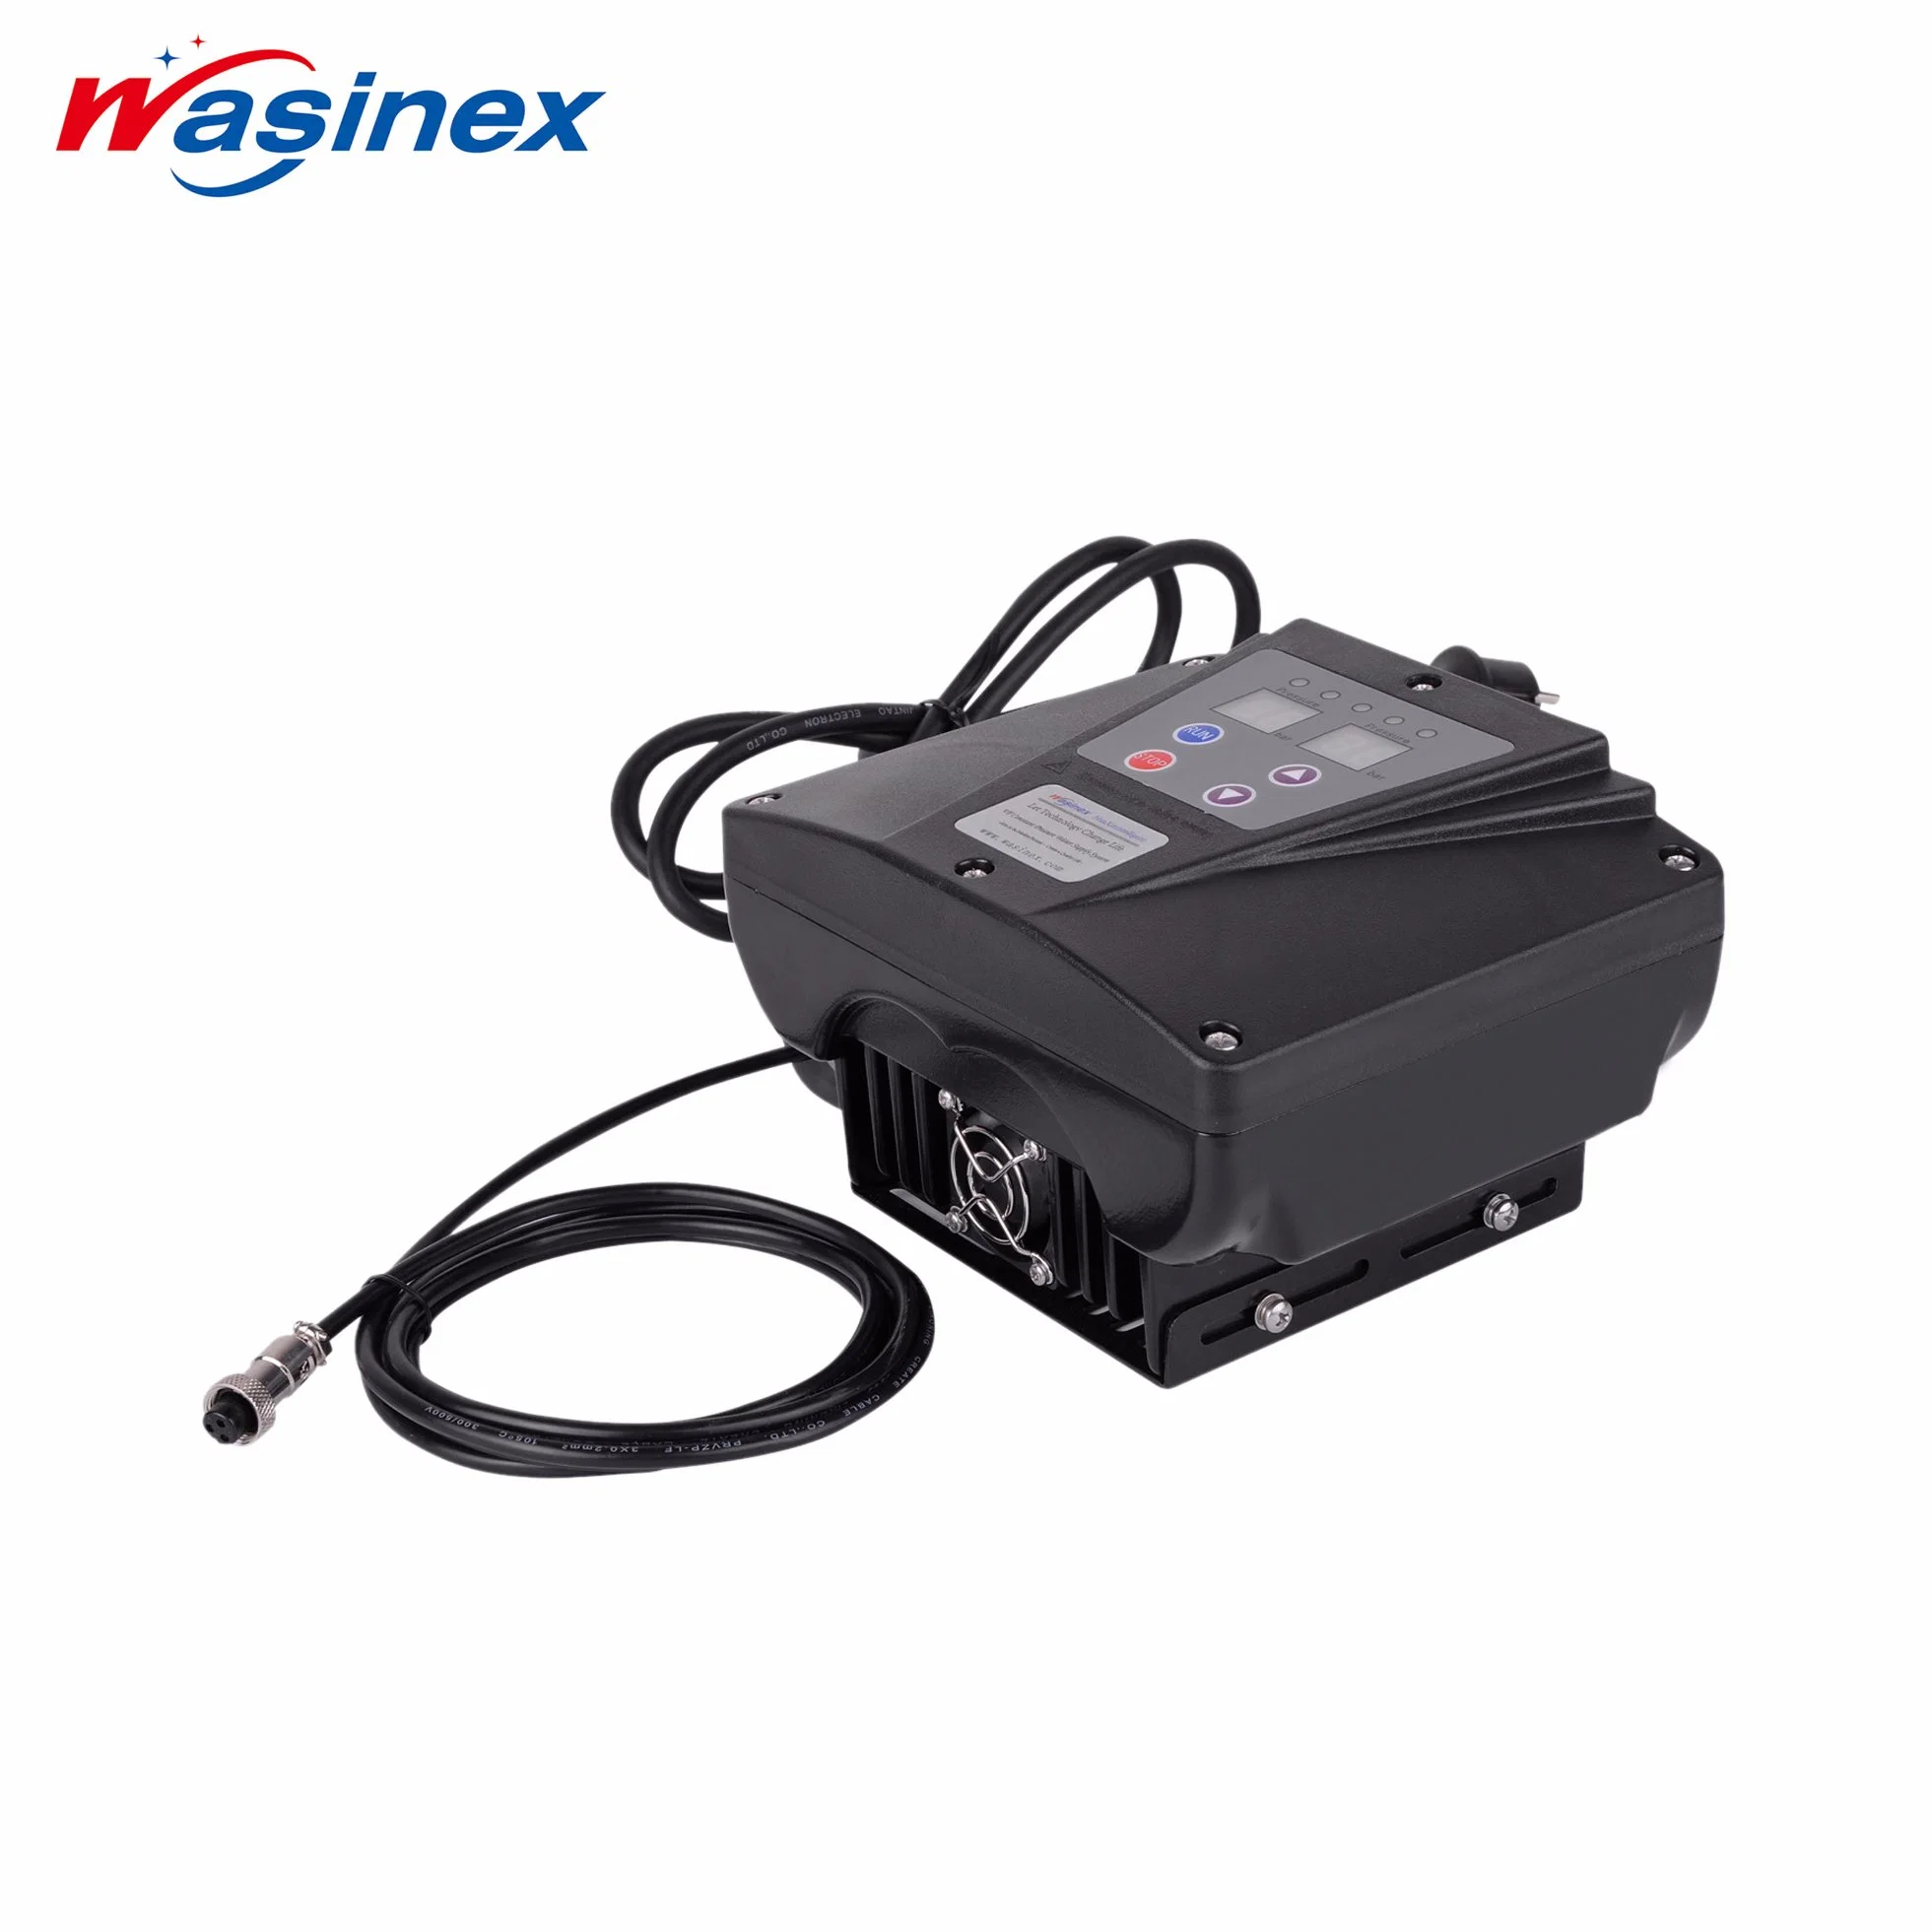 1HP 220V Constant Pressure Water Supply System Variable Frequency Drive